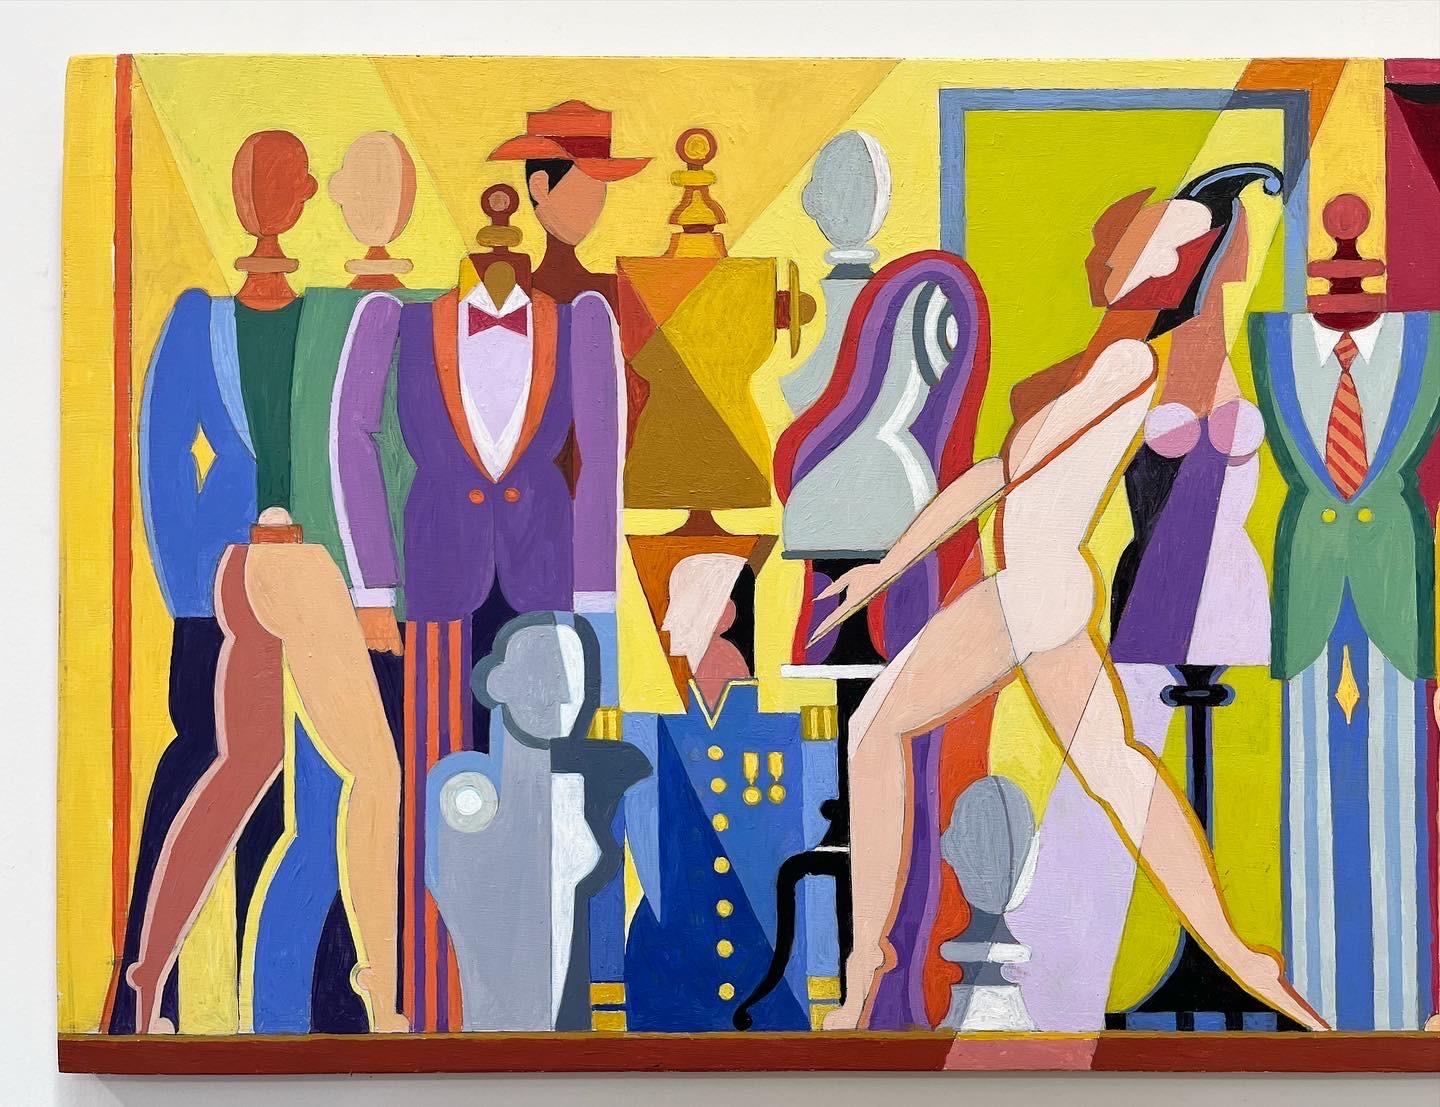 A new, vibrant work by the iconic Giancarlo Impiglia.

Born in Rome, Impiglia moved to New York in the 70s, where he established a signature style on the shoulders of Futurism and Cubism, his technical skill underpinning his eclecticism and allowing